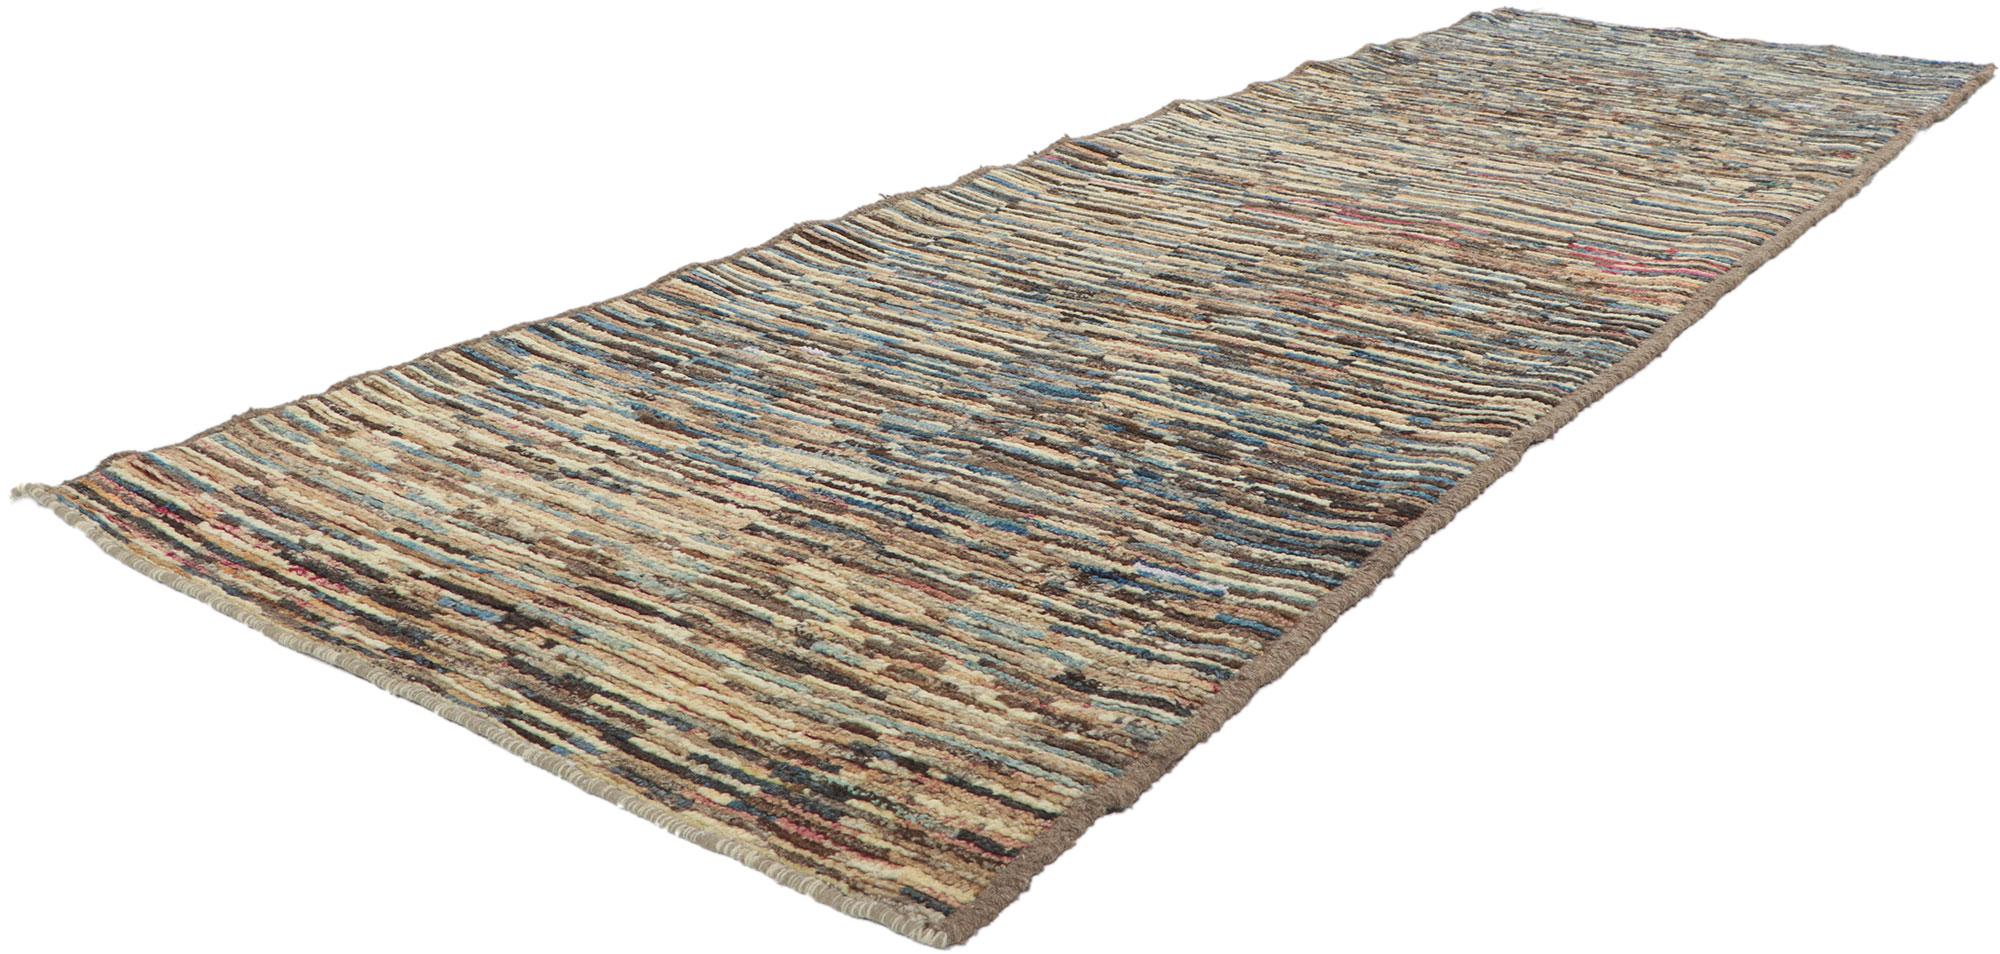 80756 New Contemporary Moroccan runner with Modern Style, 02'10 x 09'07. With its subtle graphic appeal, incredible detail and texture, this hand knotted wool contemporary Moroccan runner is a captivating vision of woven beauty. The modernistic